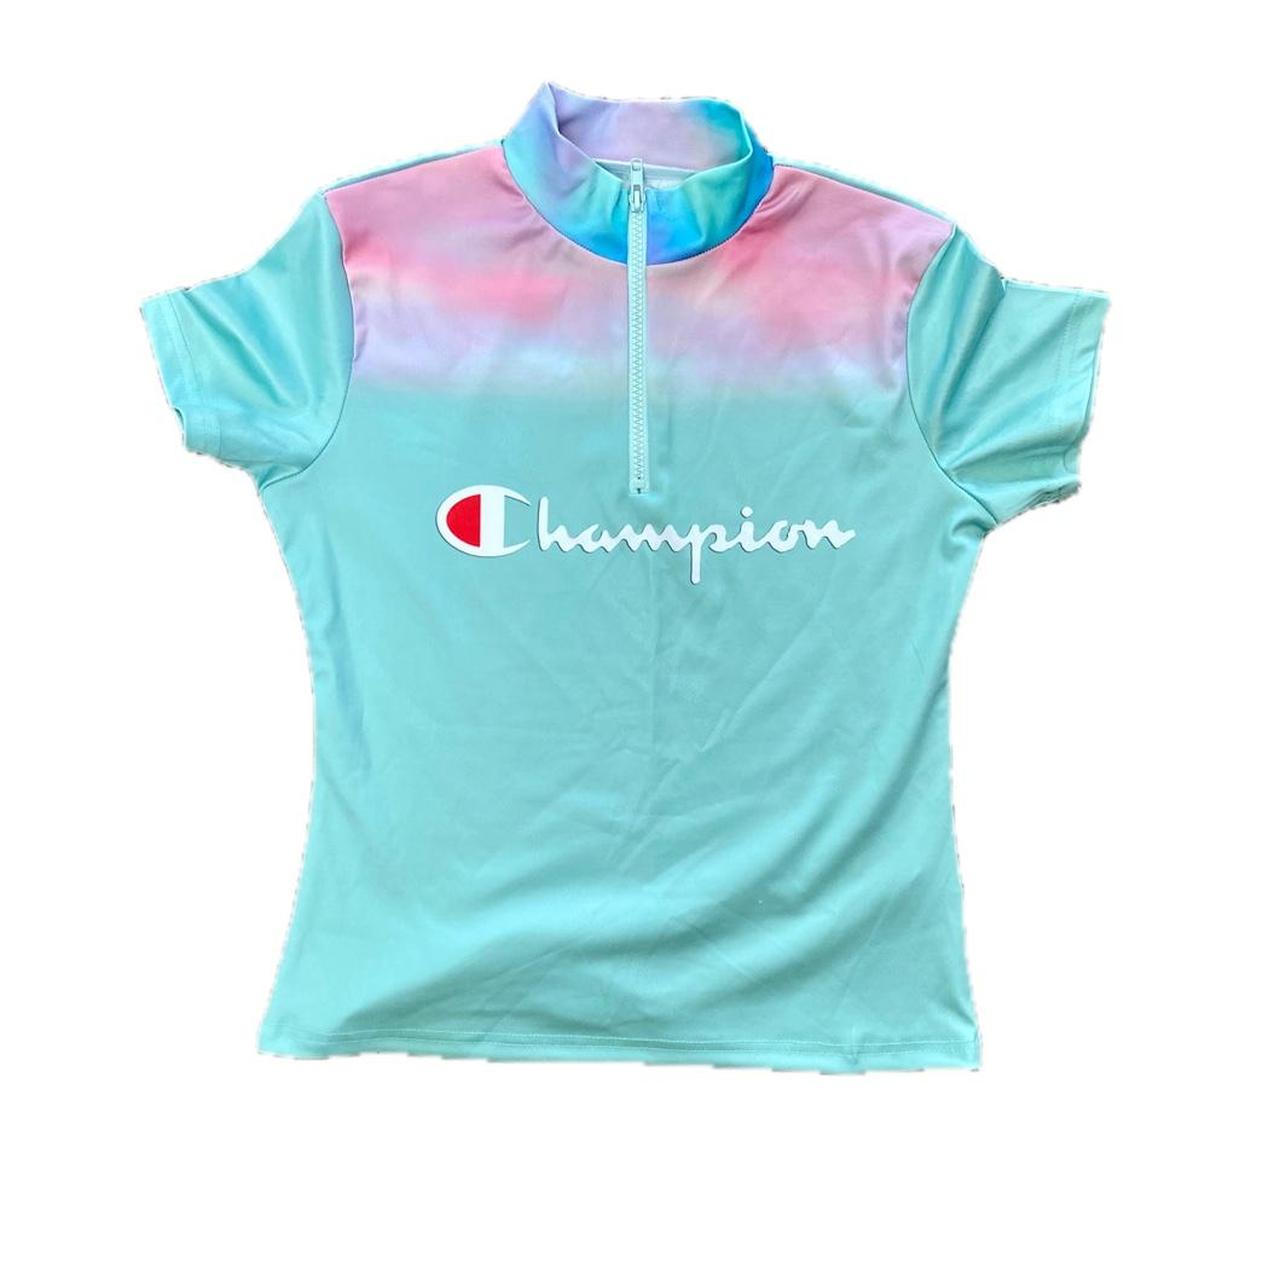 Champion Women's Blue and Pink